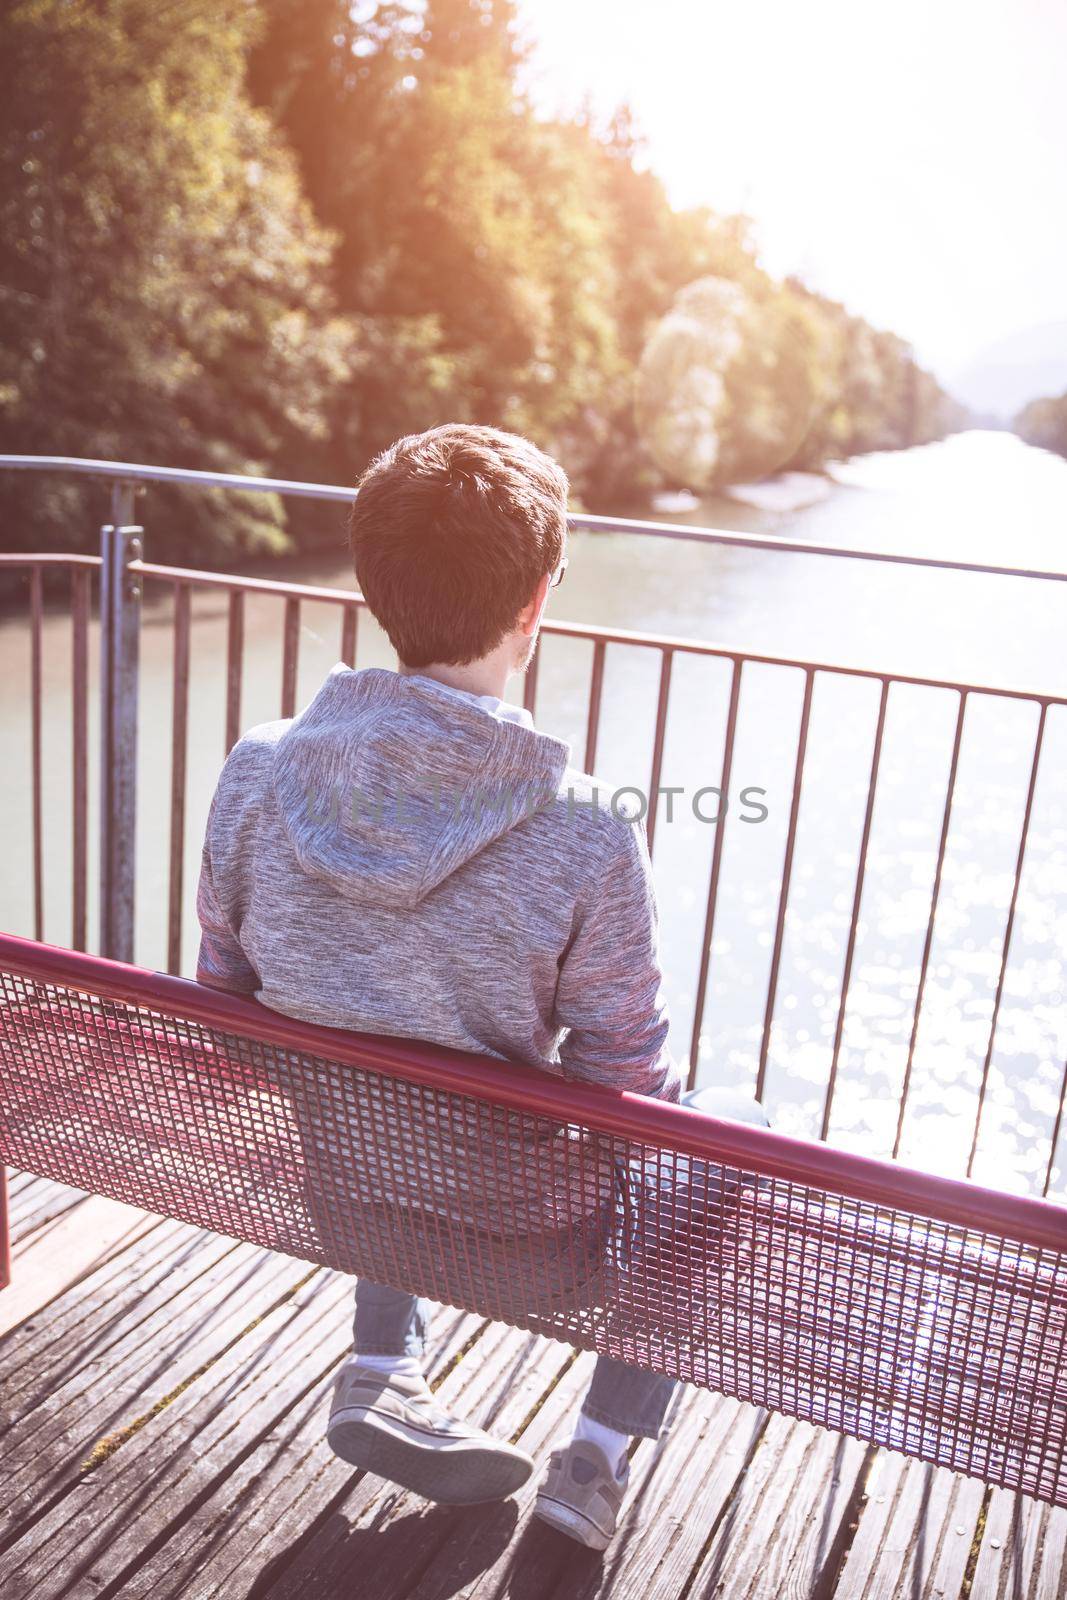 Relaxation concept: Young man sitting on red bench enjoying the view over a river by Daxenbichler